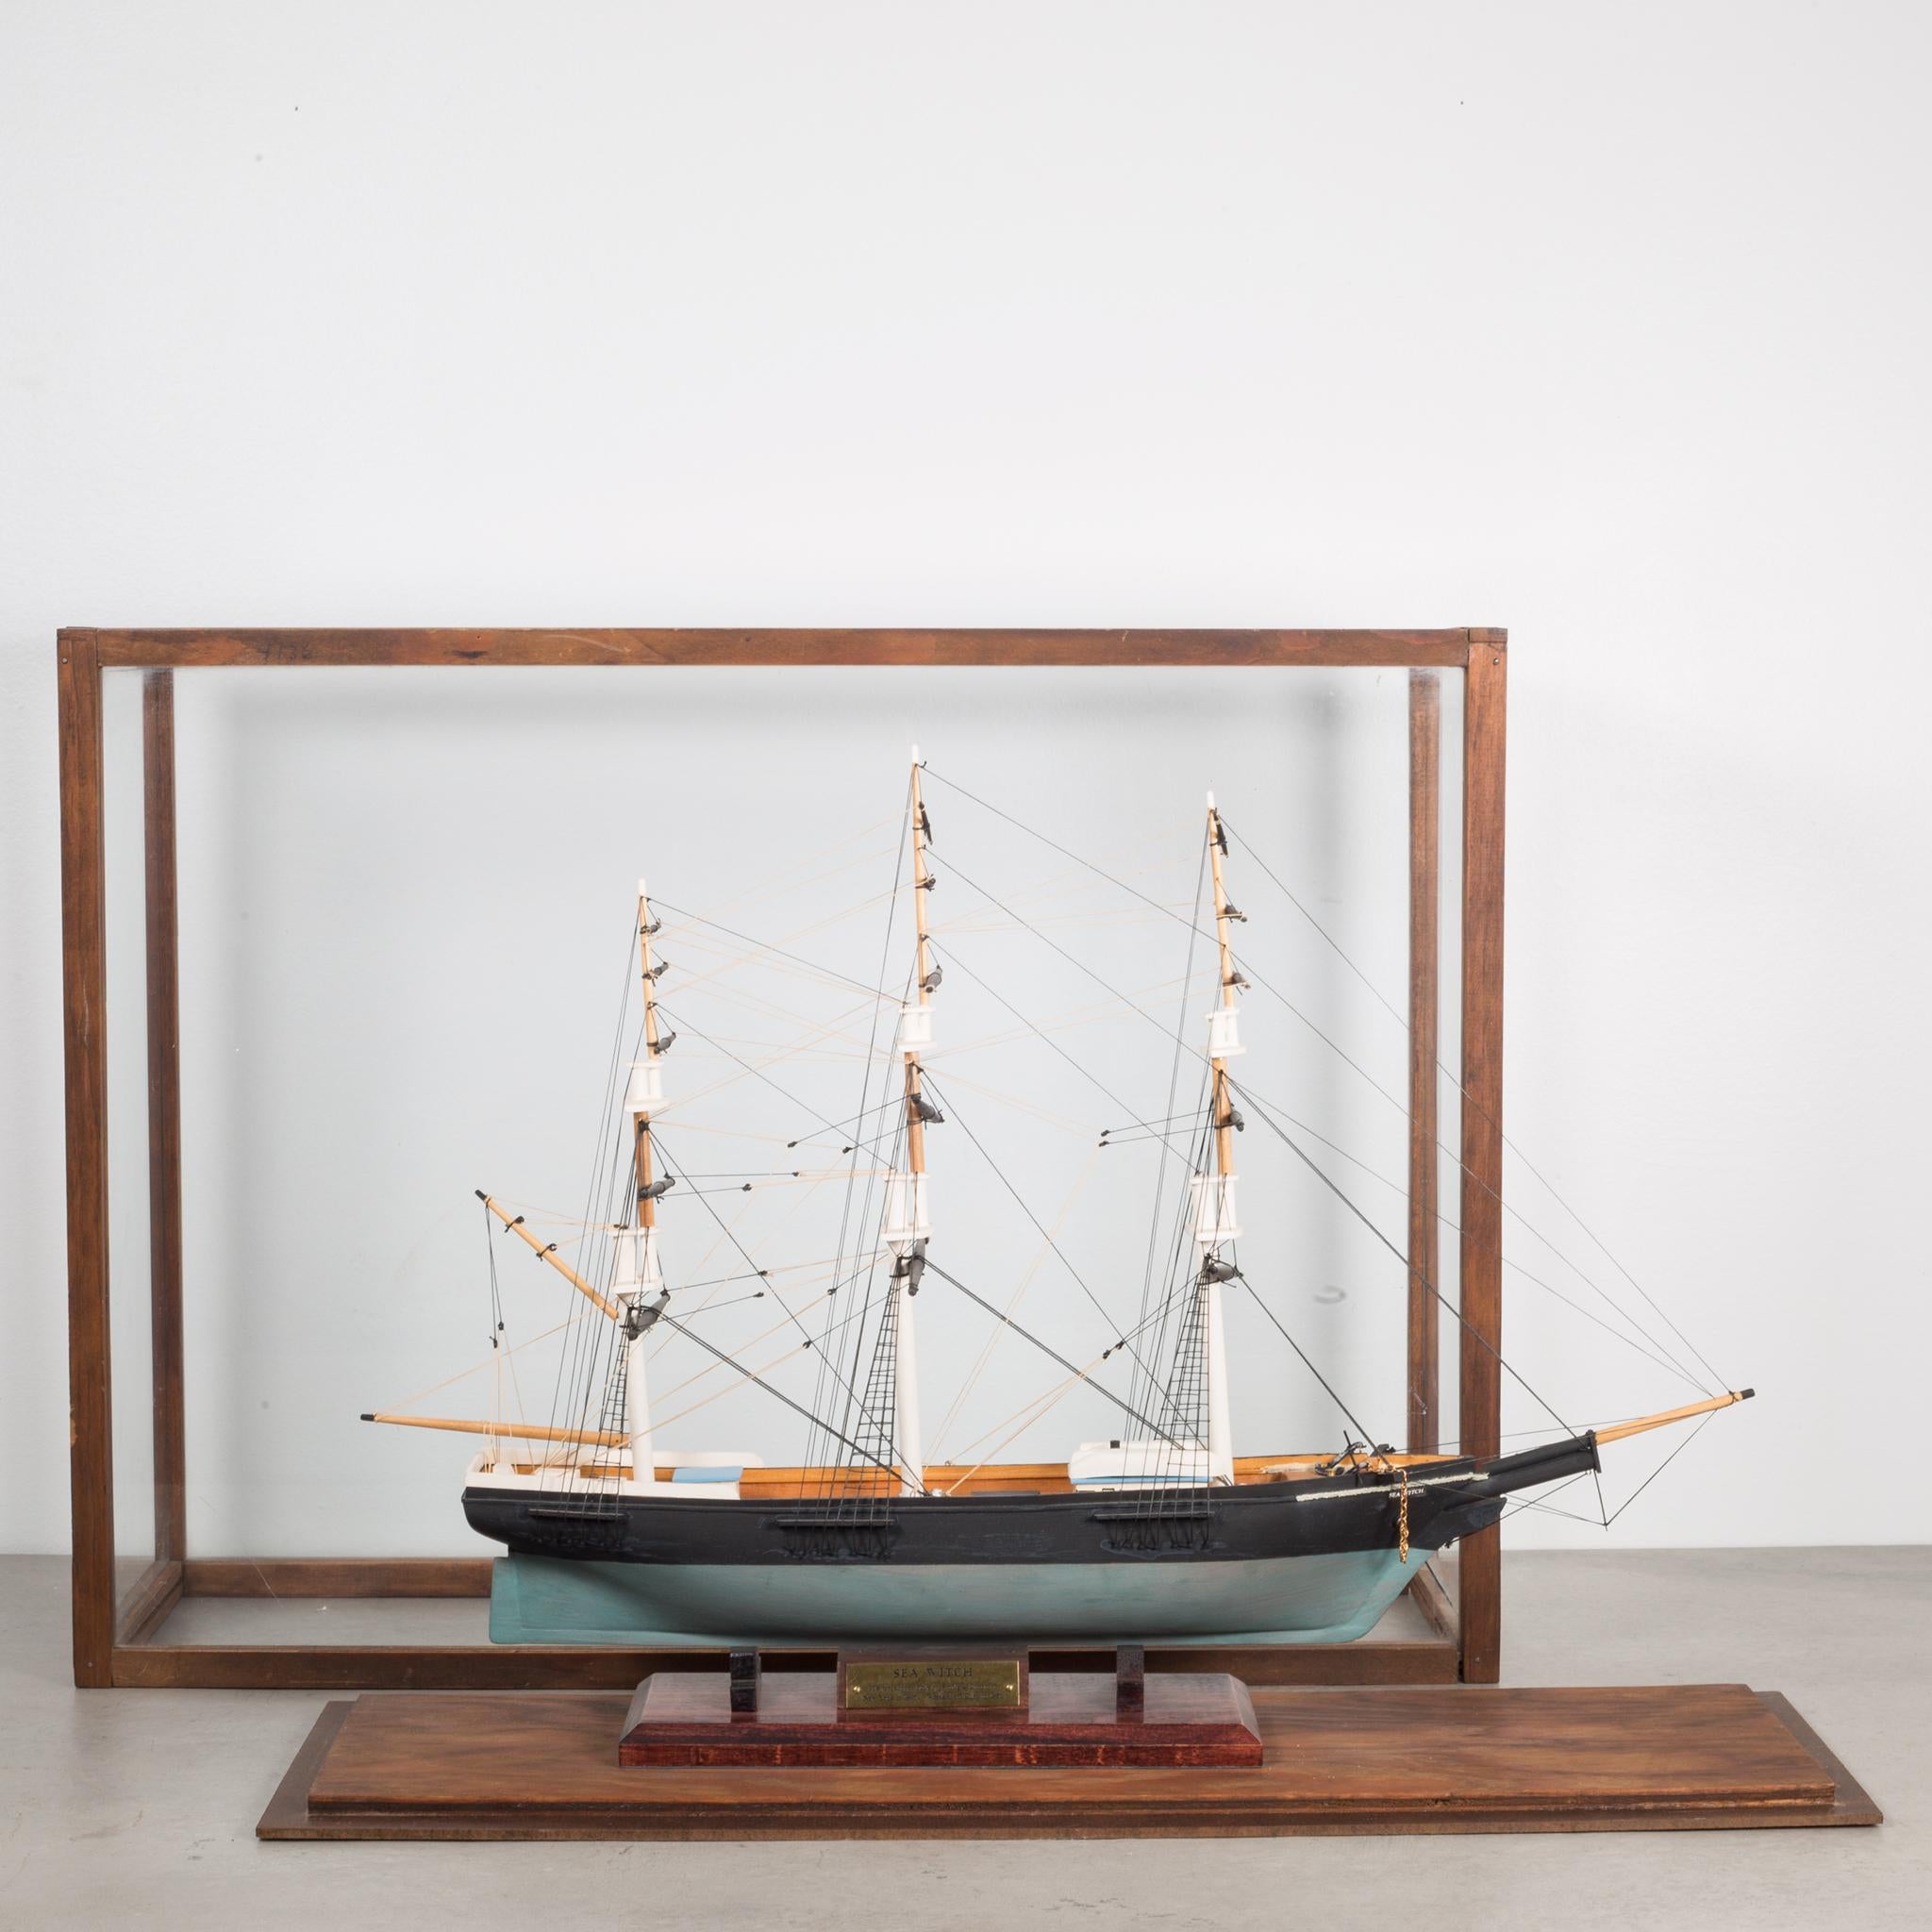 About

The Sea Witch, an American clipper ship, a model and case handmade by Piel Craftsmen. This piece has retained its original finish.

Creator Piel Craftsman
Date of manufacture: circa 1940-1970.
Materials and techniques: Wood,